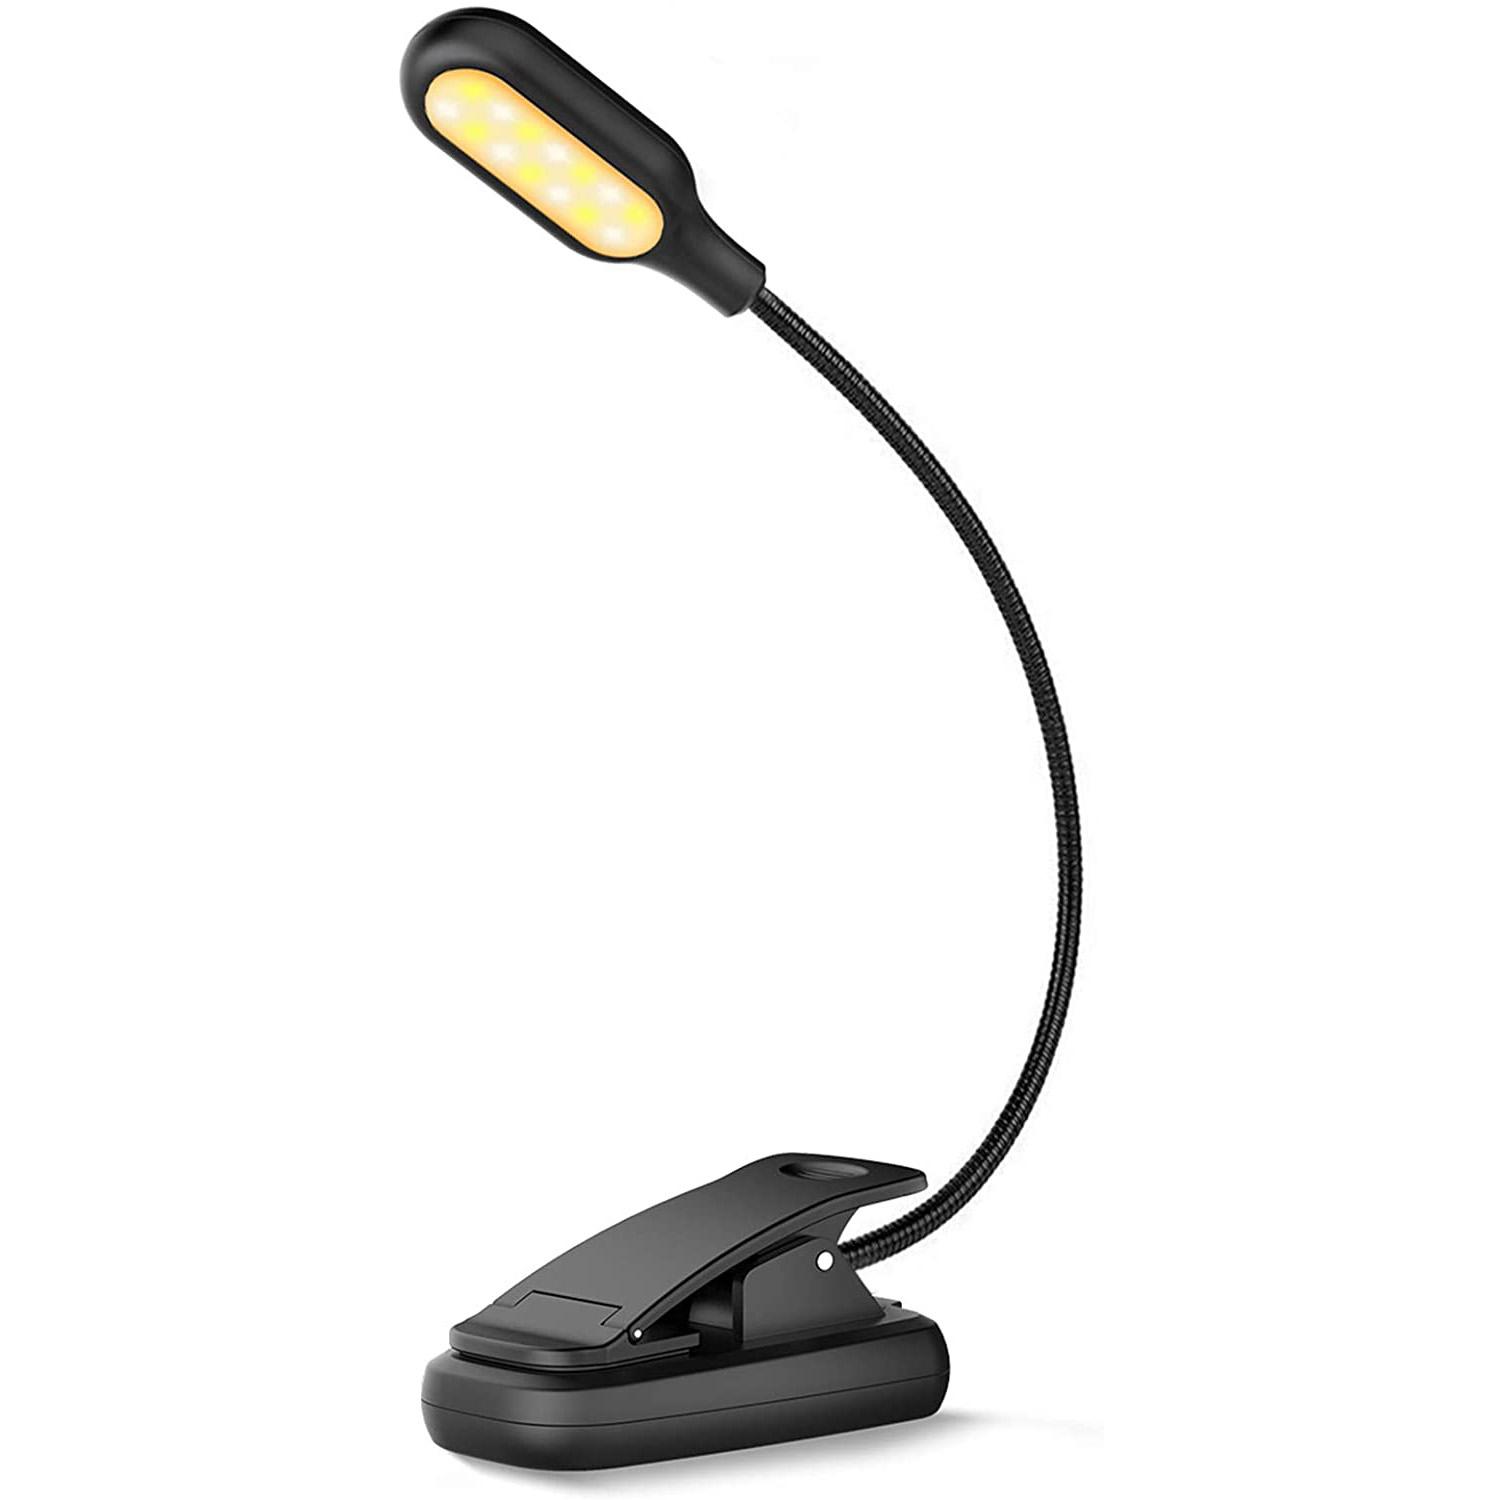 Rechargeable LED Clip on Reading Light for $4.64